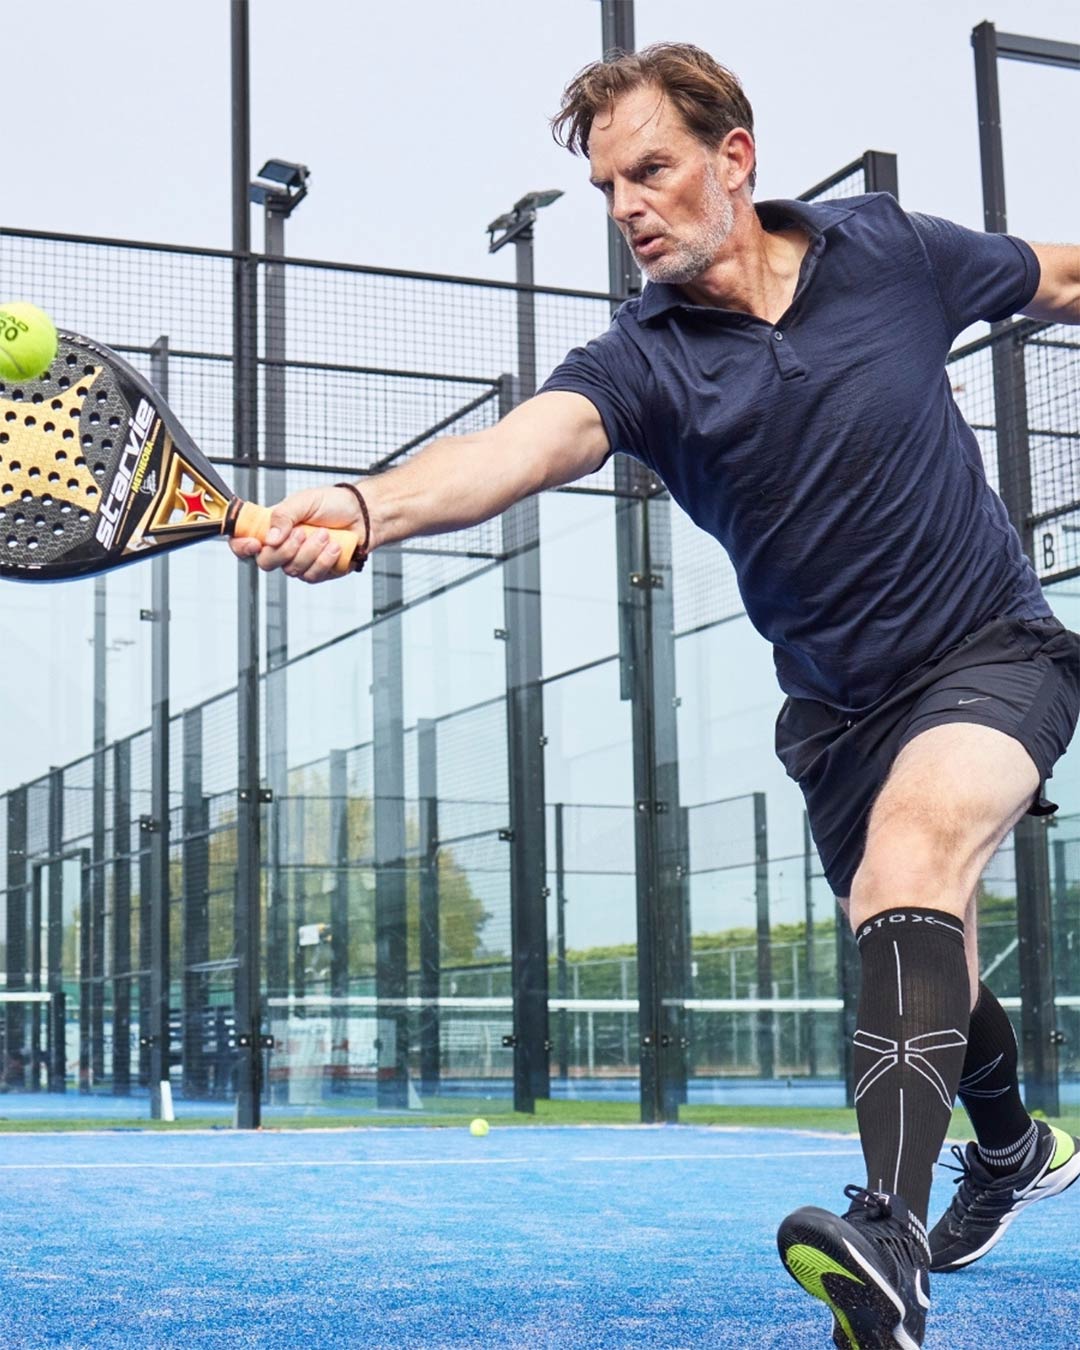 Ronald de Boer in motion while on a padel court.